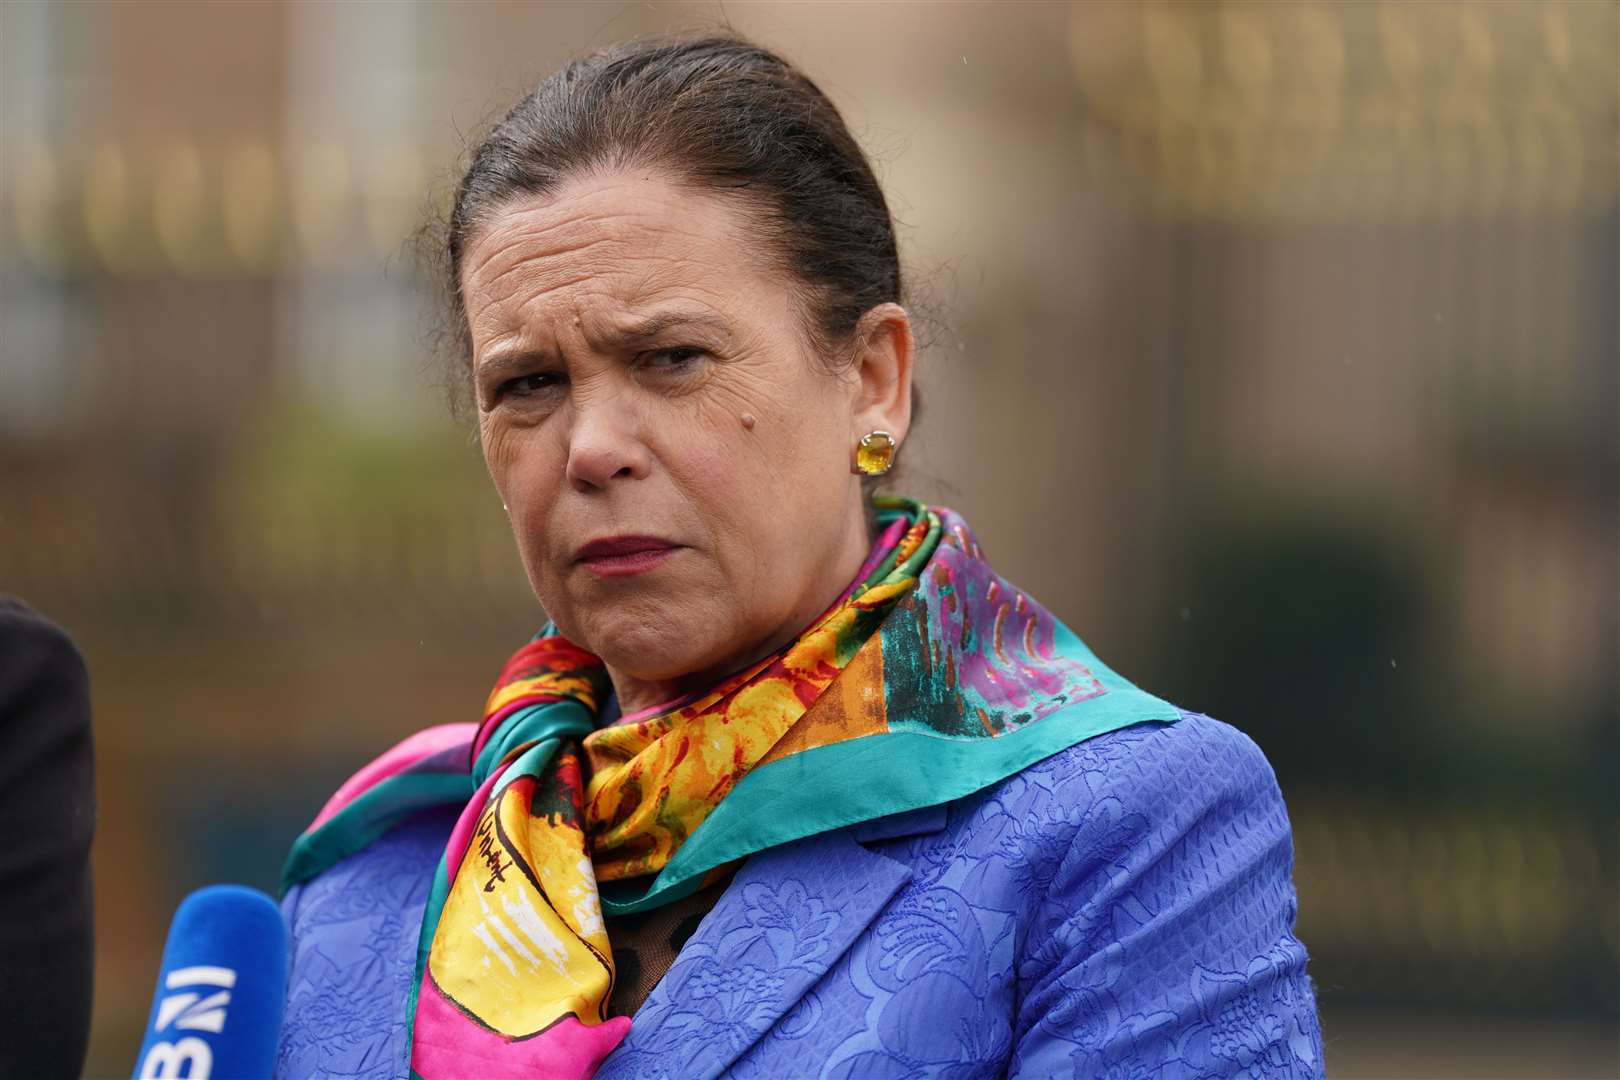 Sinn Fein Party leader Mary Lou McDonald speaking to the media (Brian Lawless/PA)